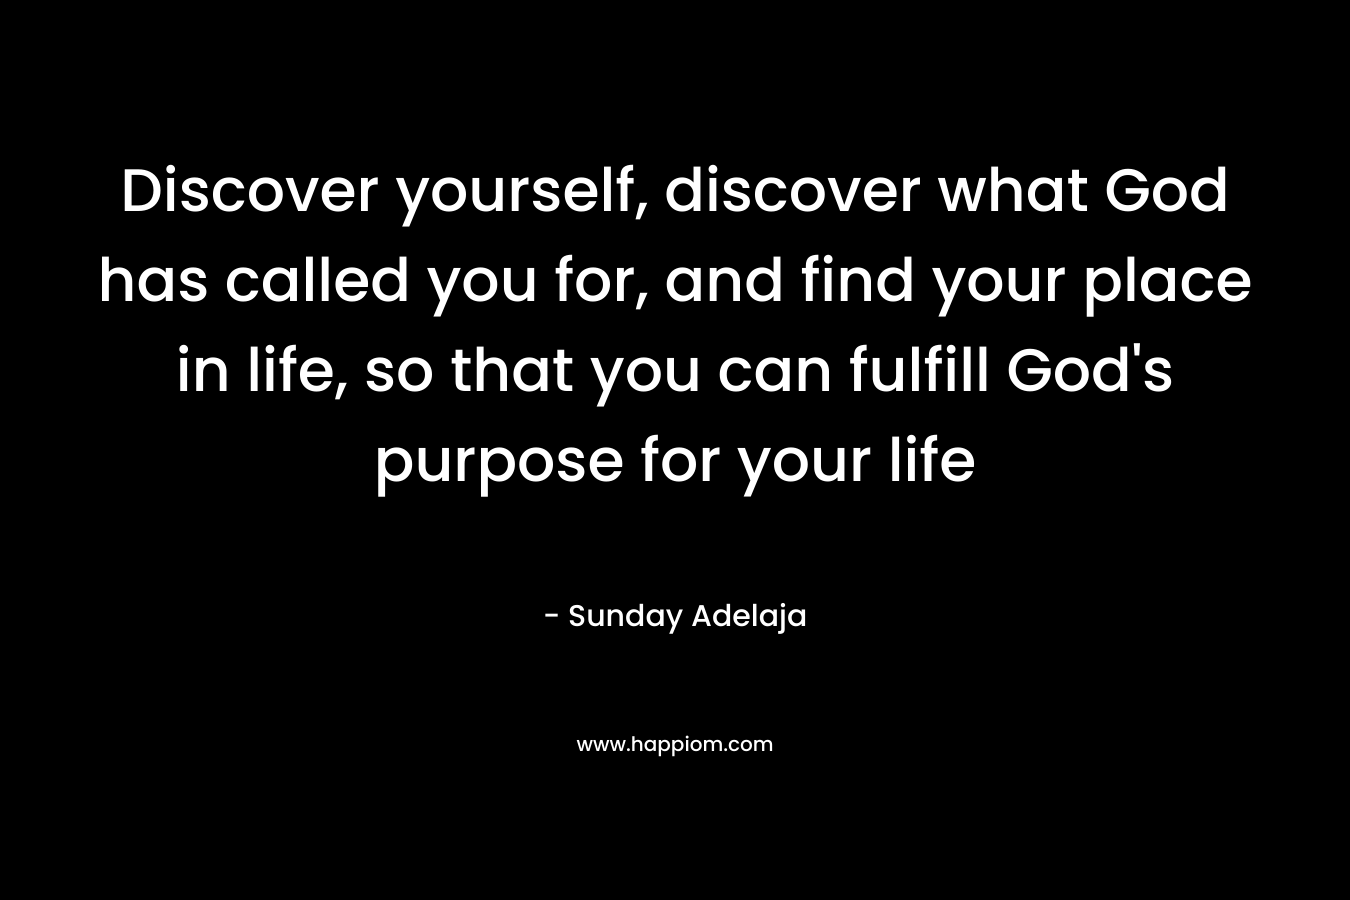 Discover yourself, discover what God has called you for, and find your place in life, so that you can fulfill God's purpose for your life